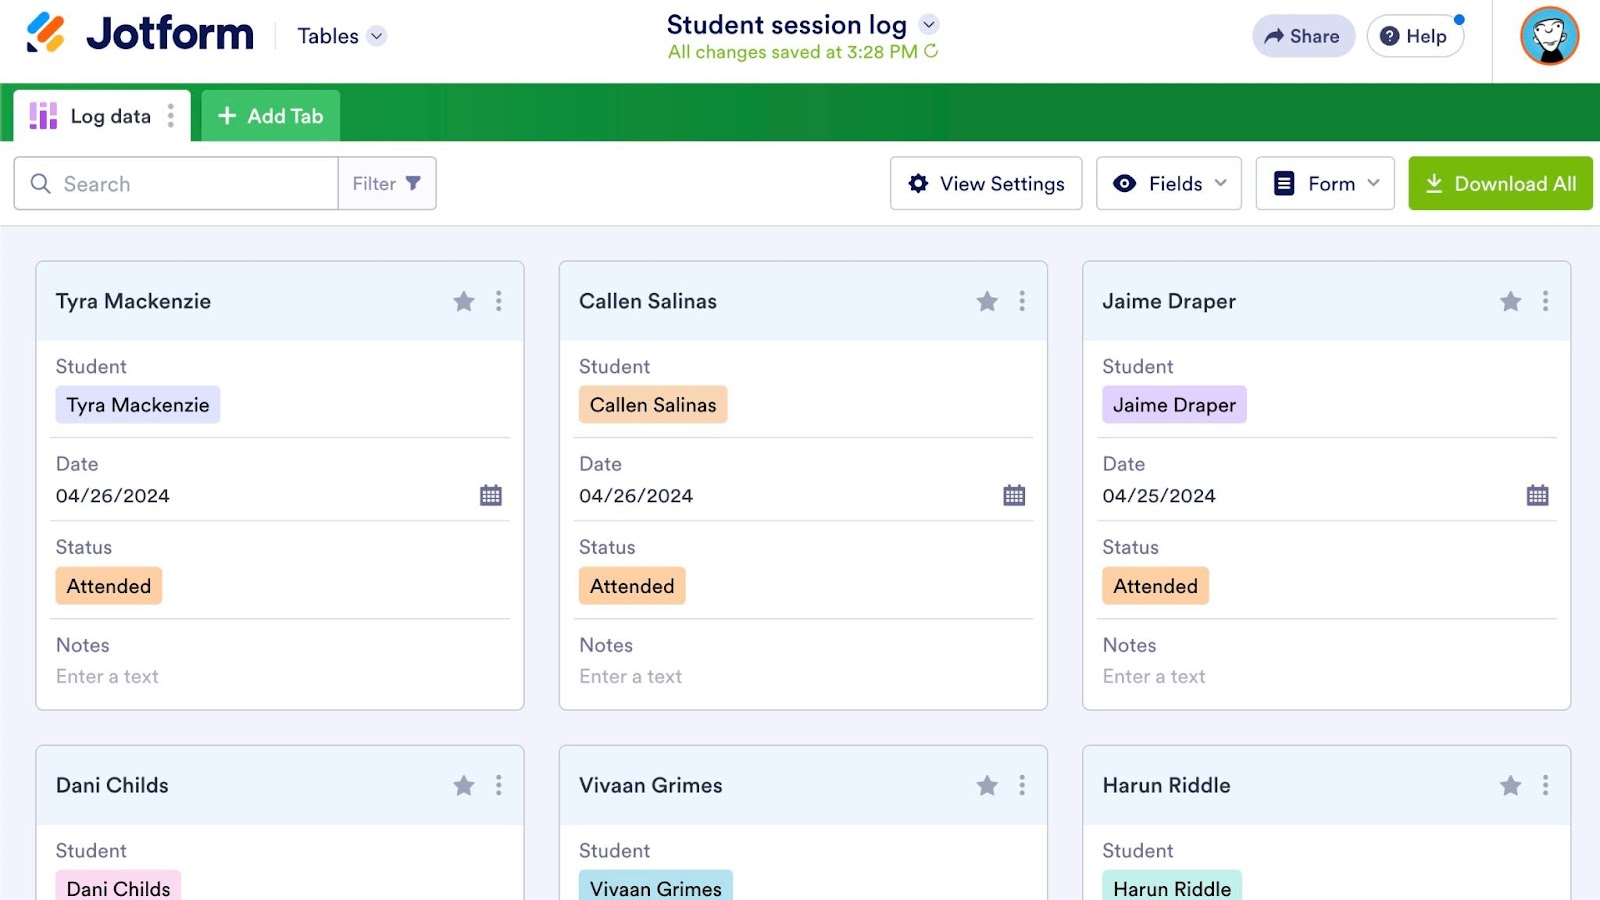 Student Session Log in Jotform Tables in Cards View